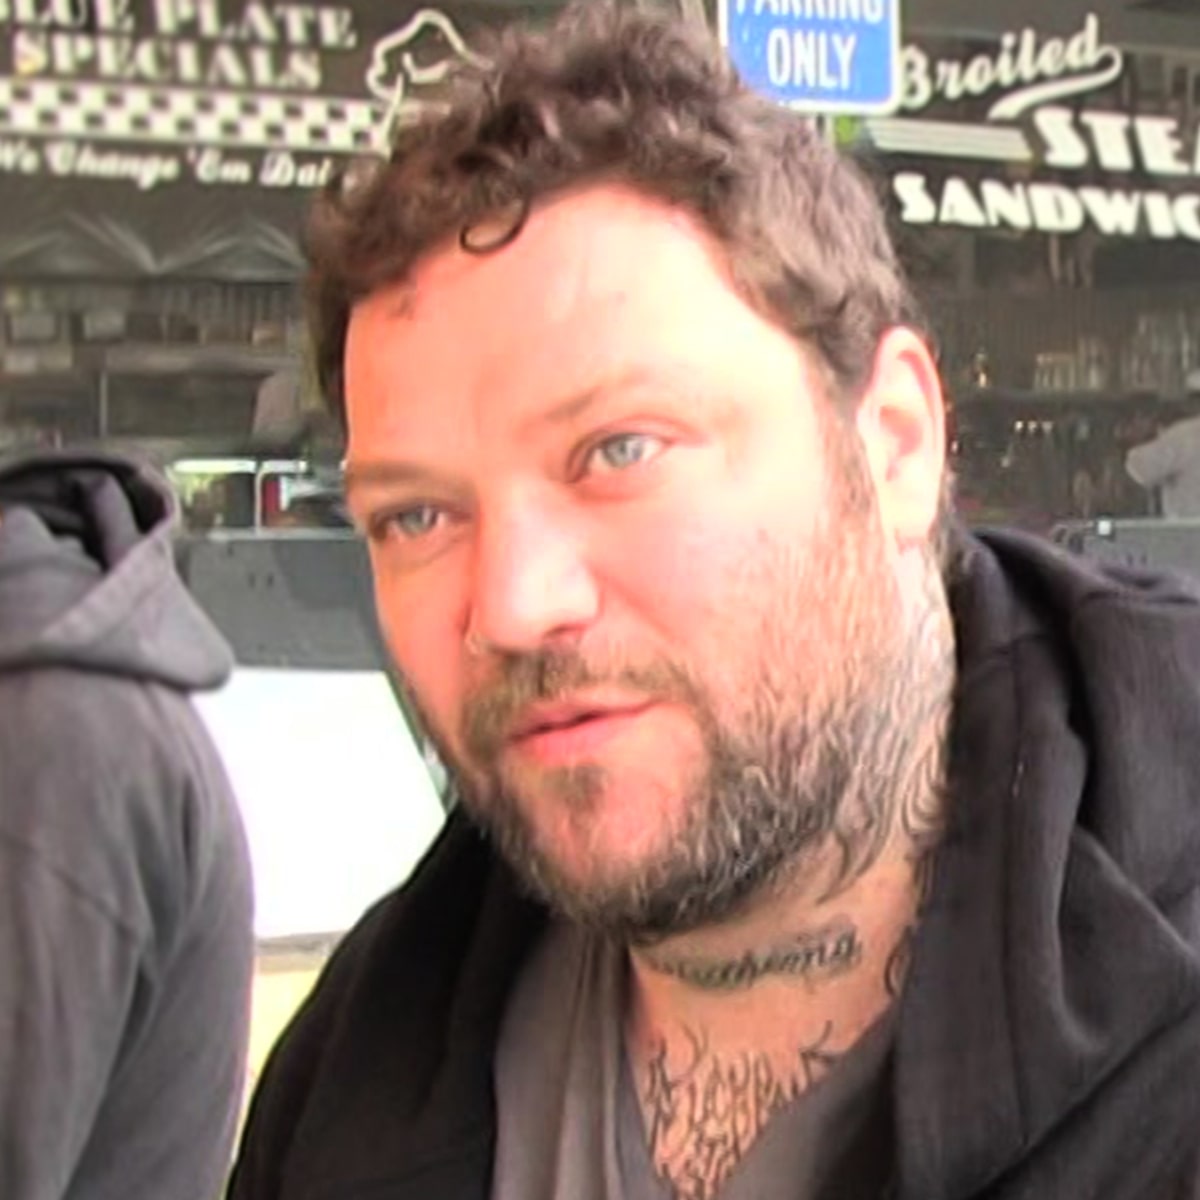 bam margera - Only Broiled Plate Specials W Chang'an bal Sandwic